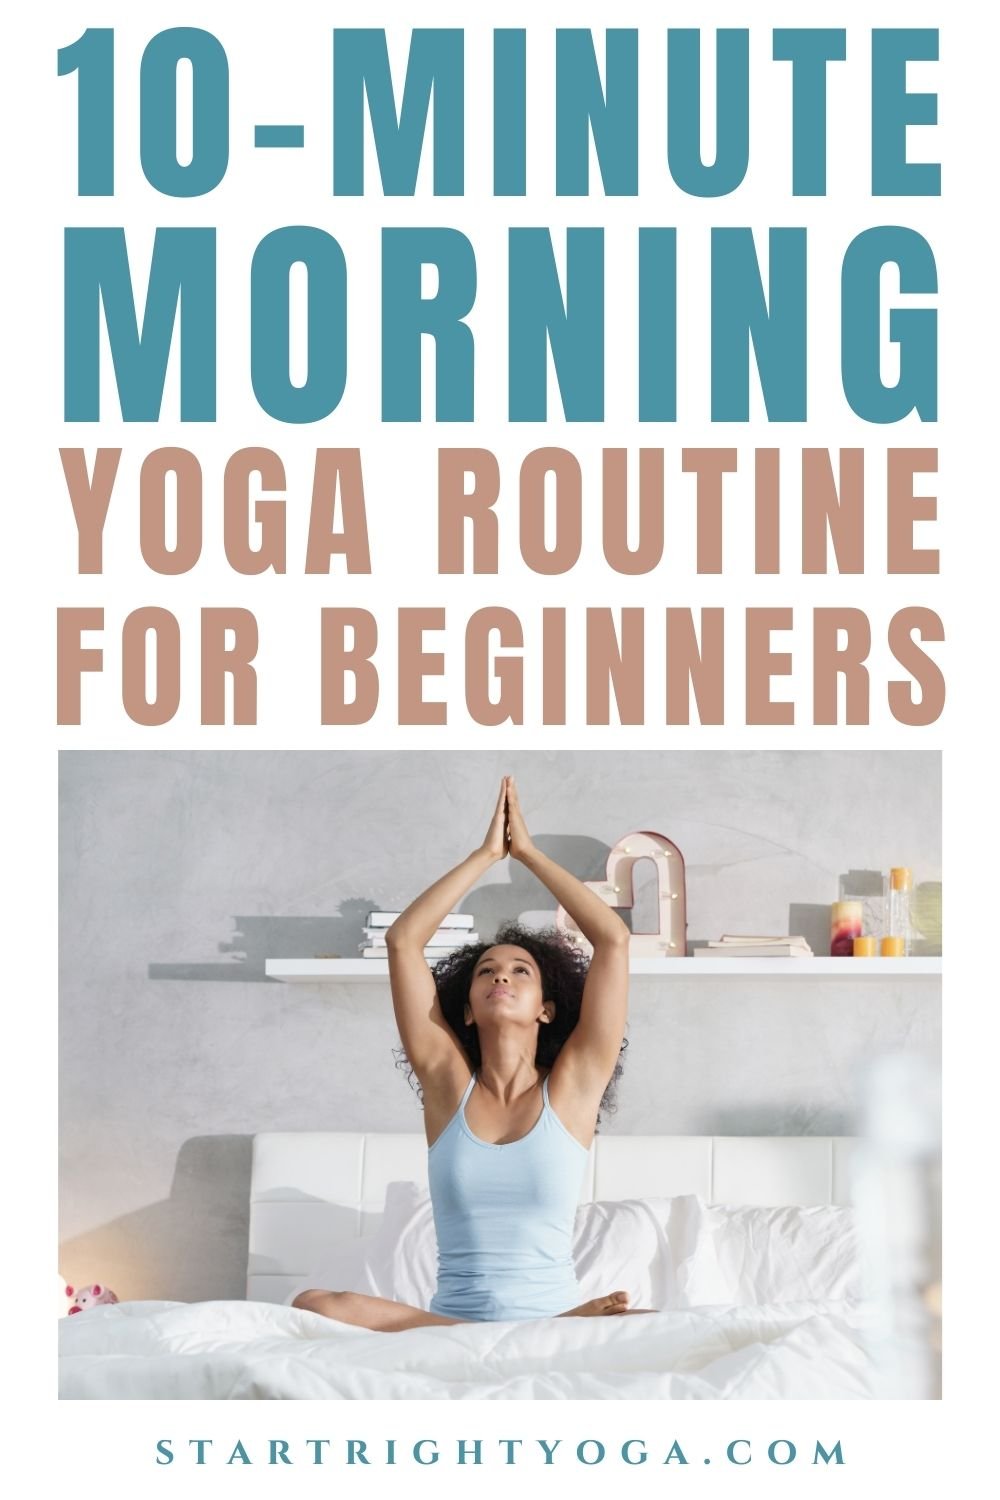 Good Morning Yoga Routine For Beginners